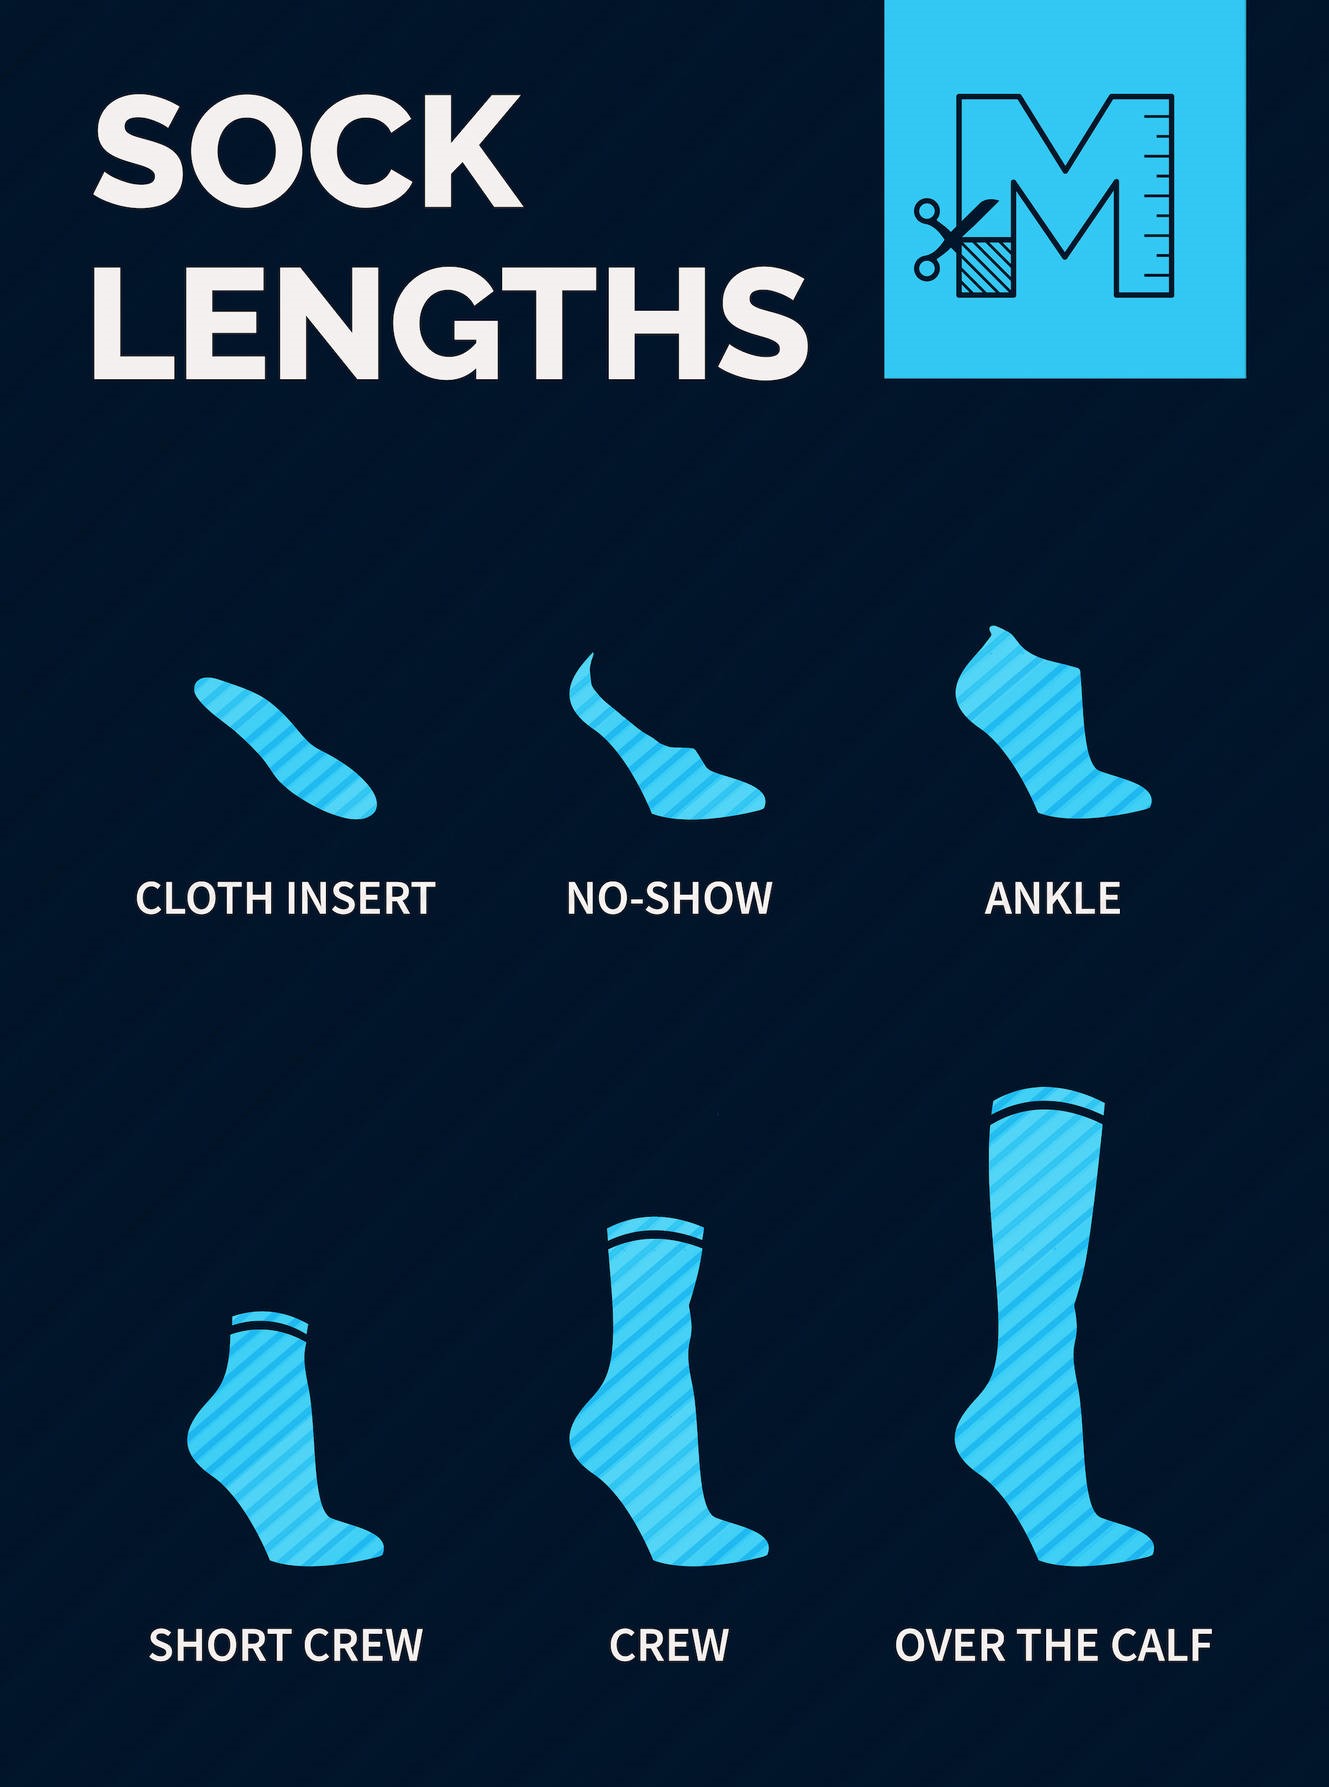 How to choose and wear socks - the right way | FTSHP blog